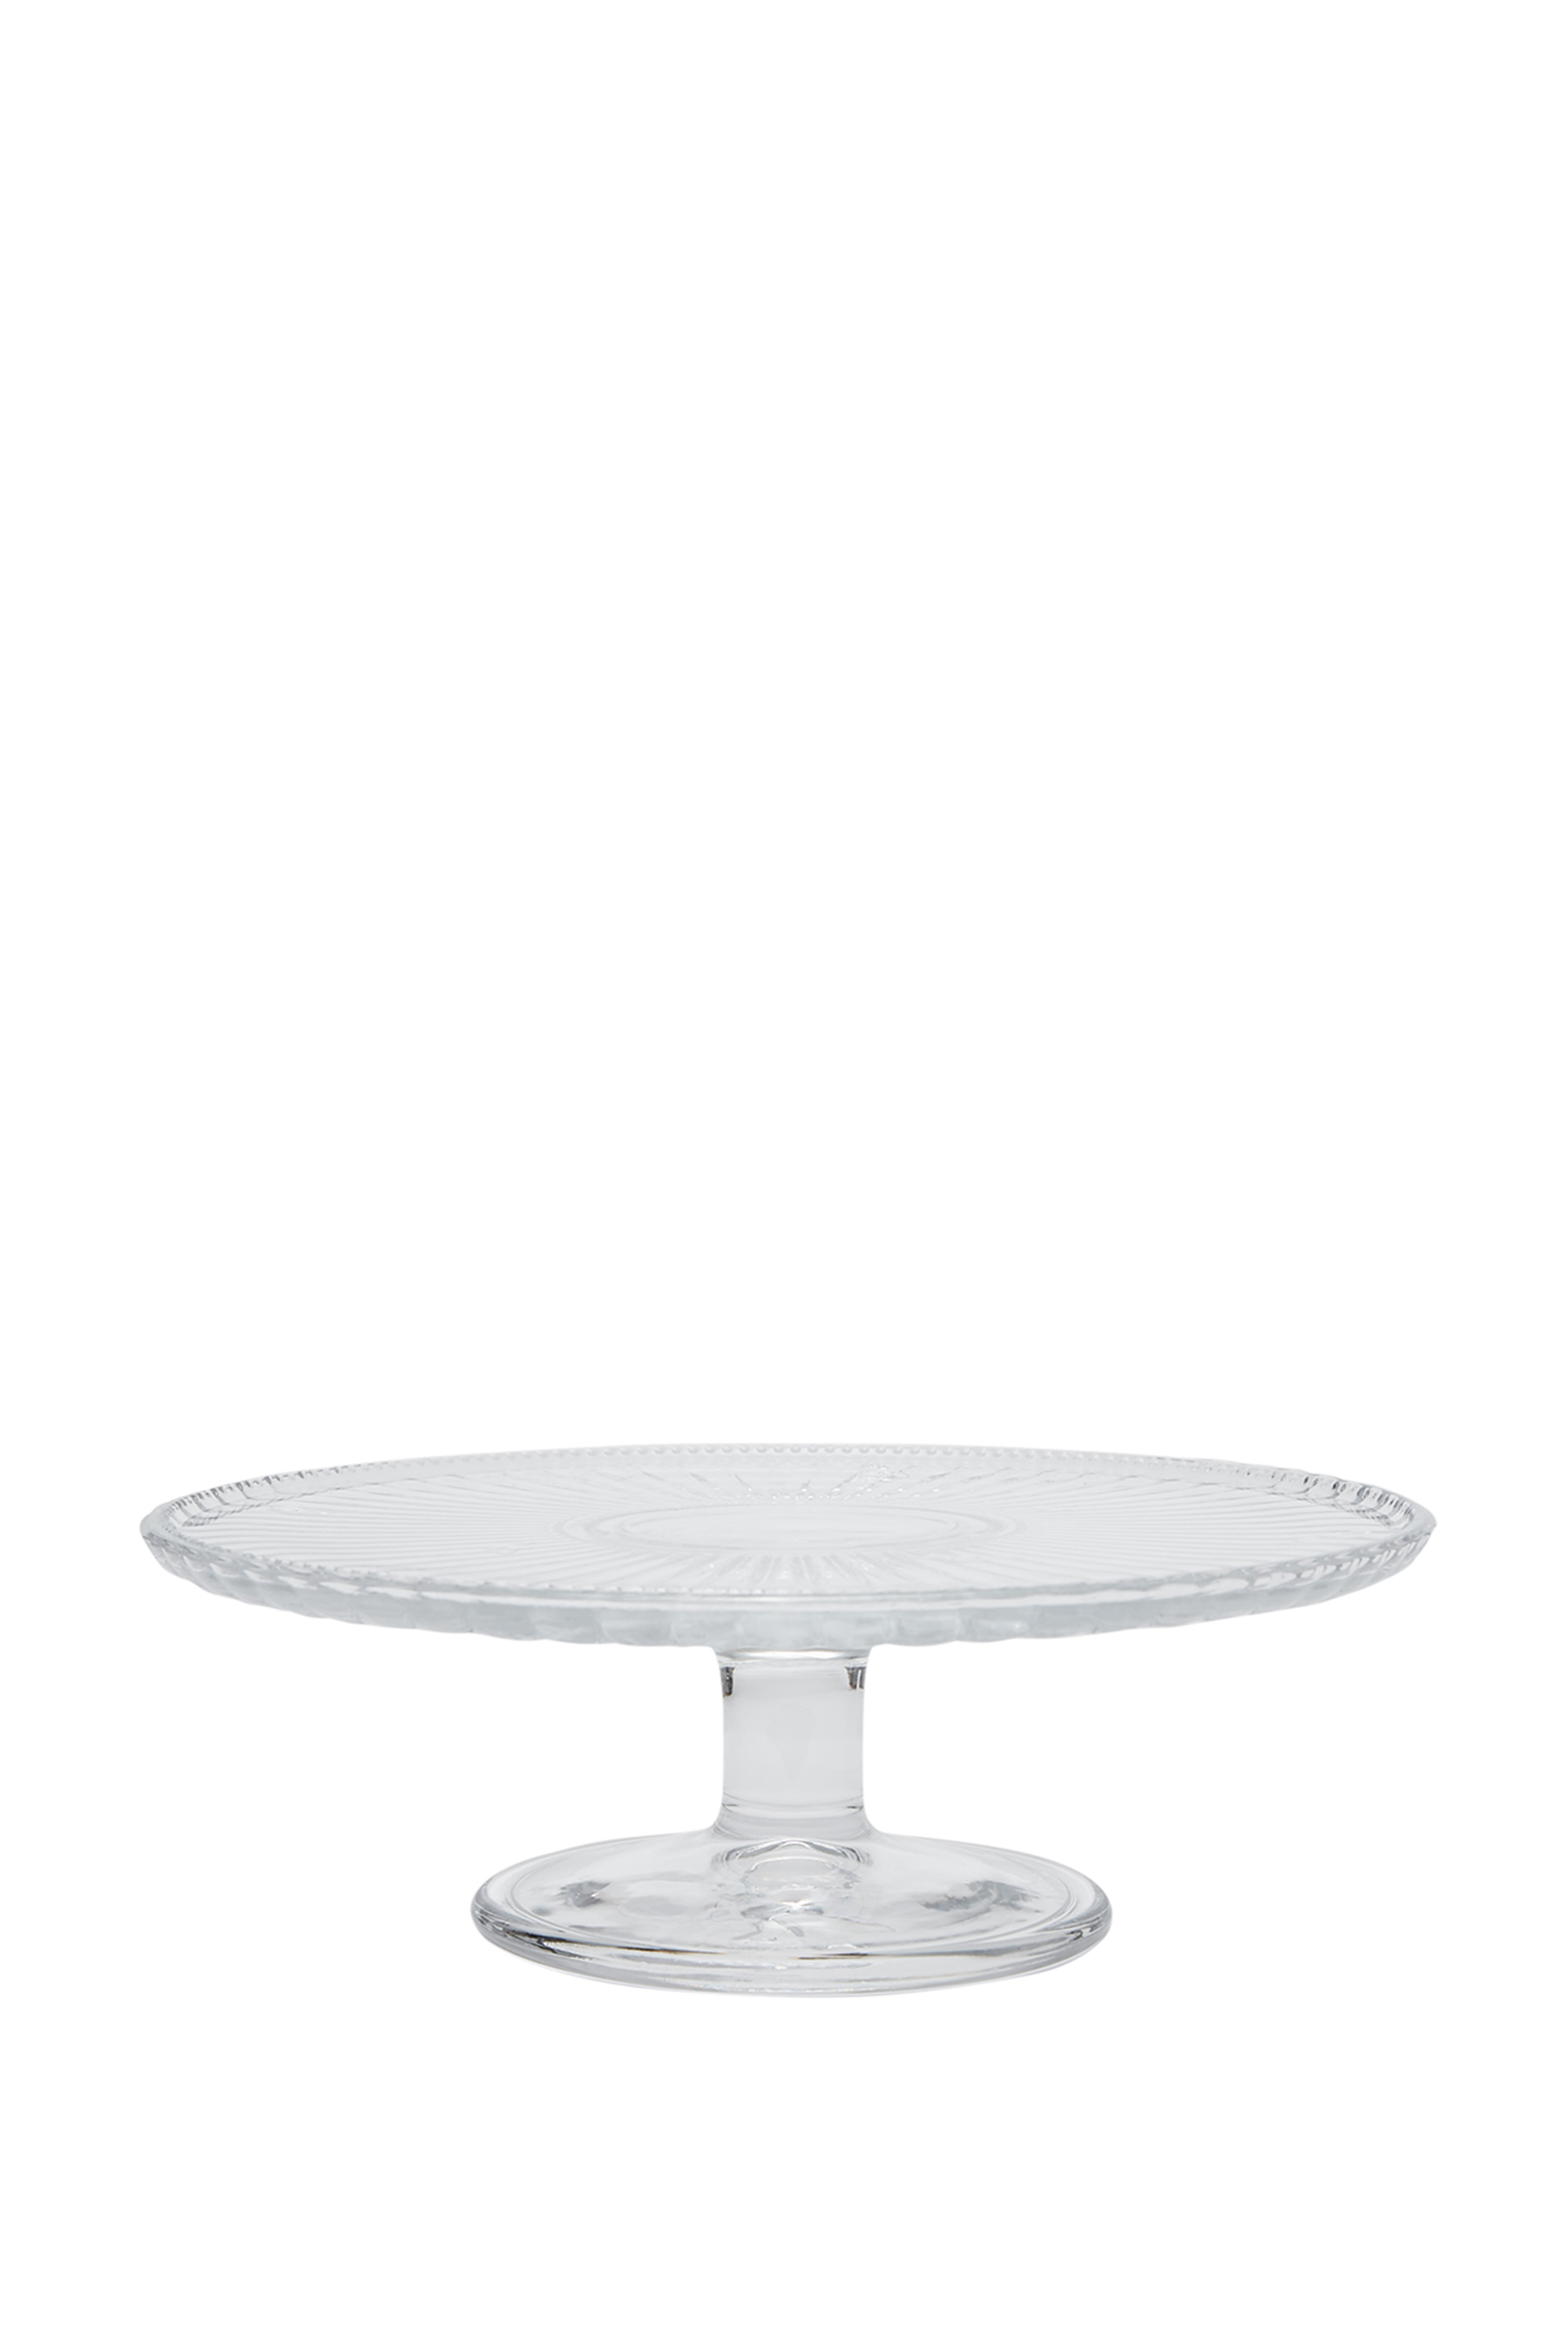 joules-bee-glass-footed-cake-stand